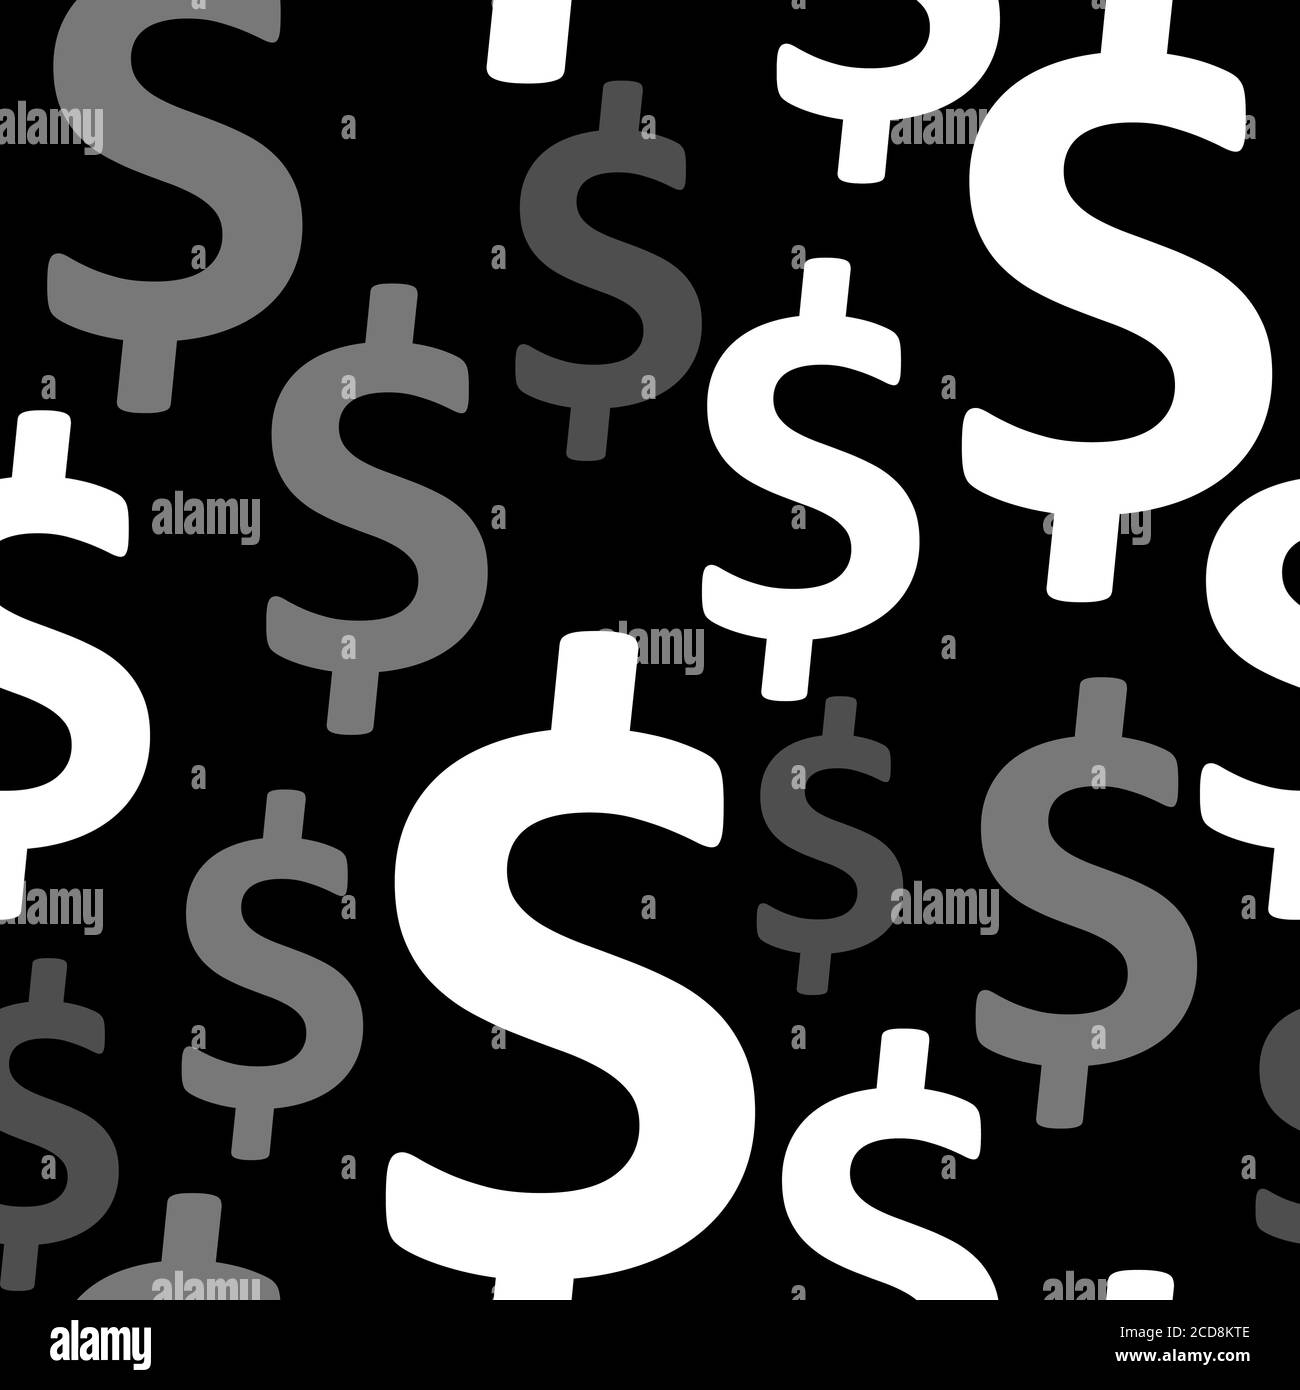 Still life of dollar signs on a black background Stock Photo - Alamy